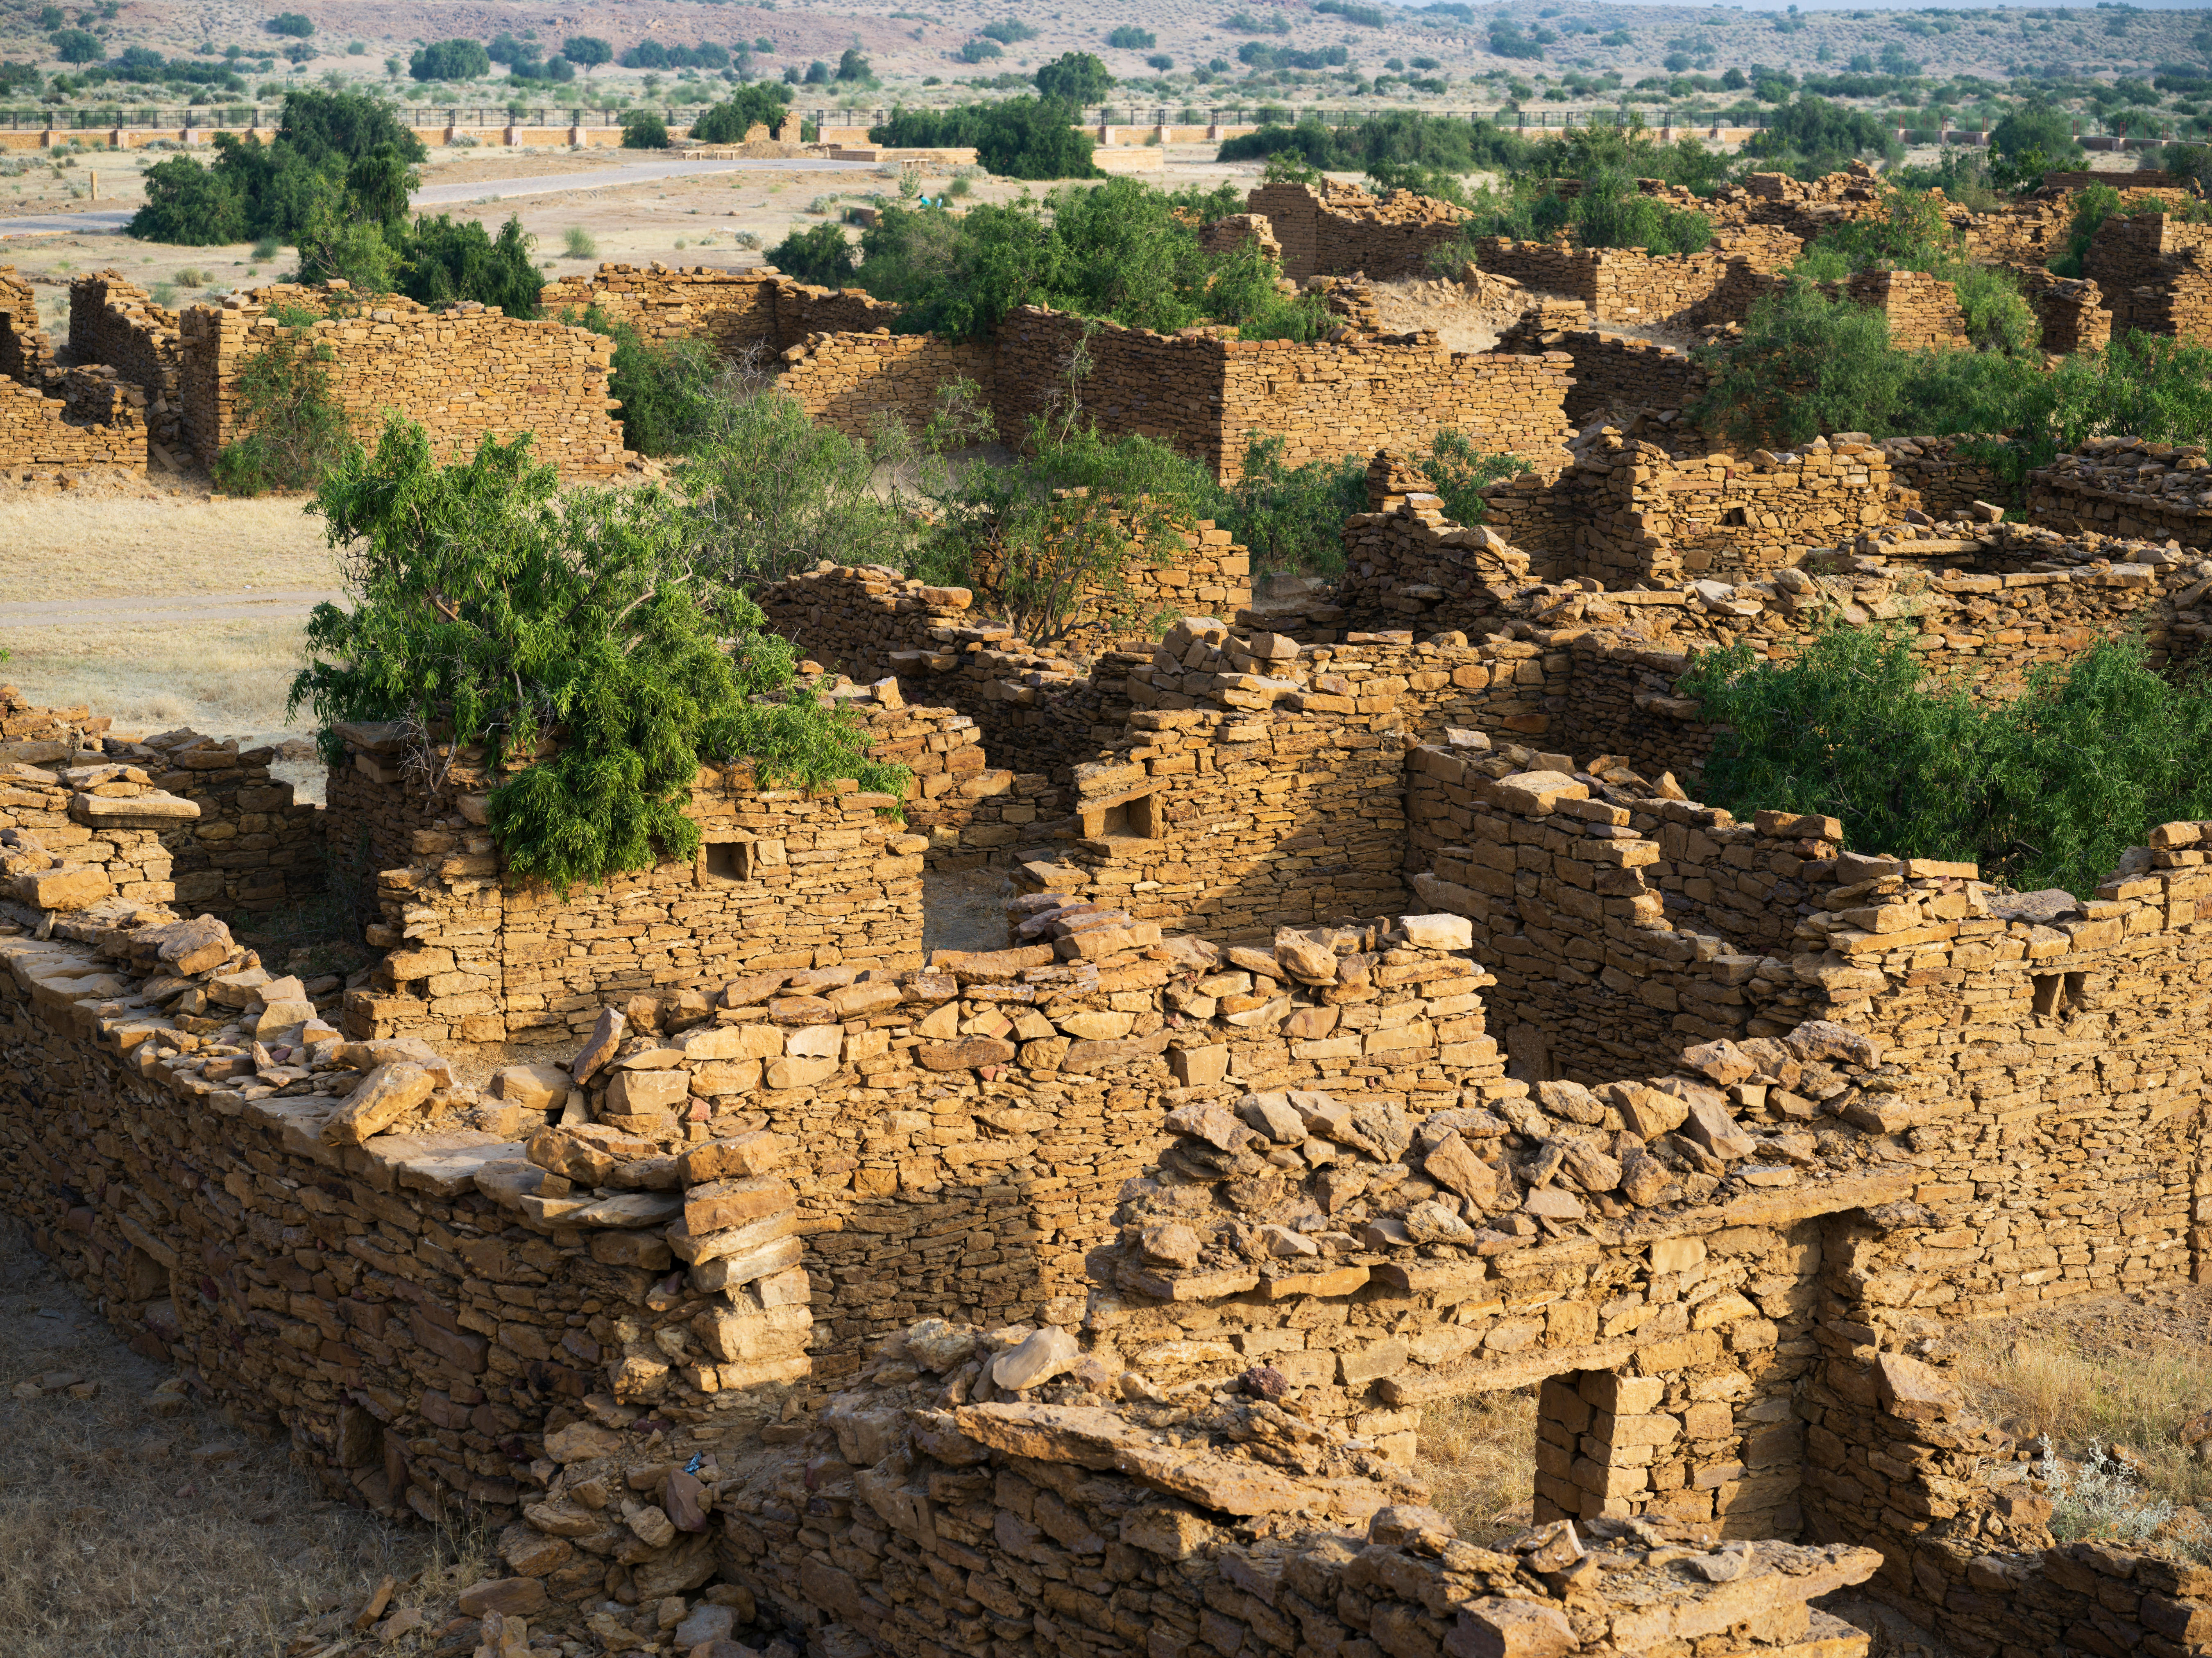 The abandoned ghost village of Kuldhara, India has been left crumbling apart for centuries